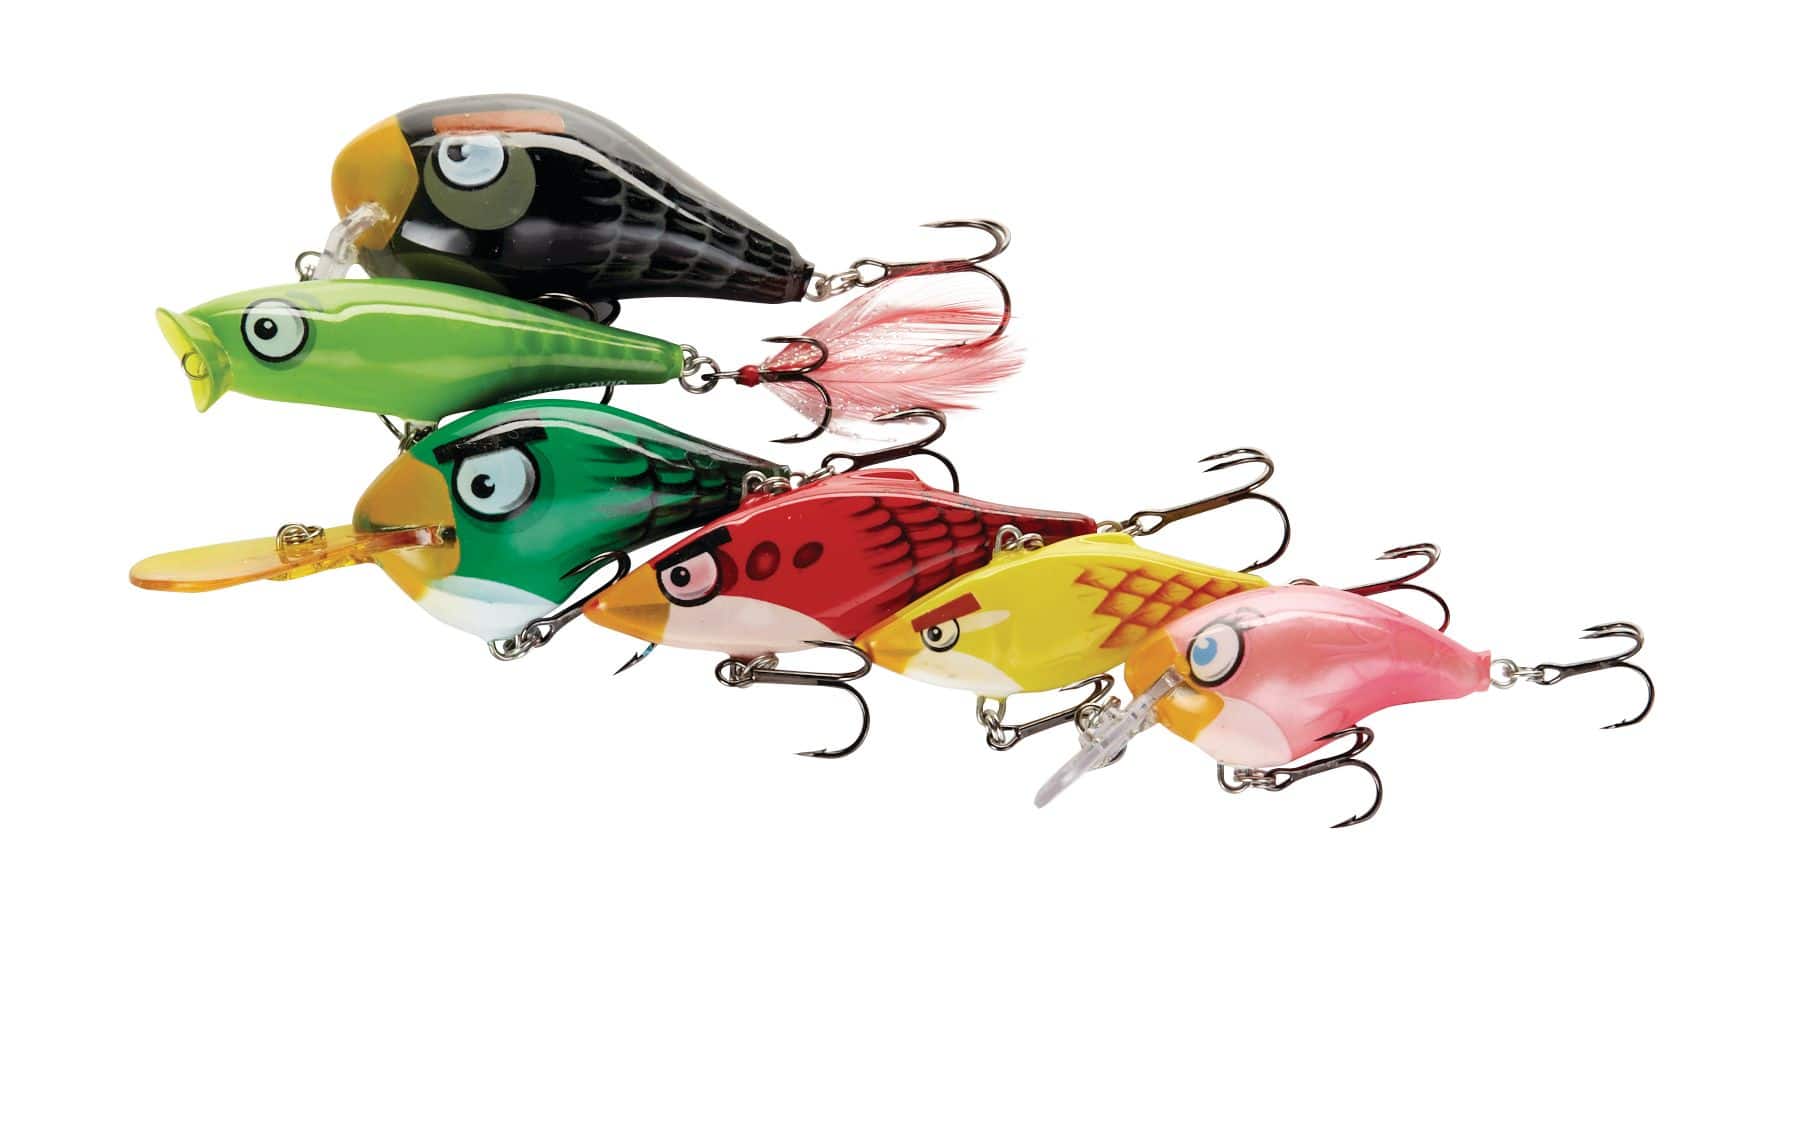 Rapala Angry Birds DT Green Bird Lure